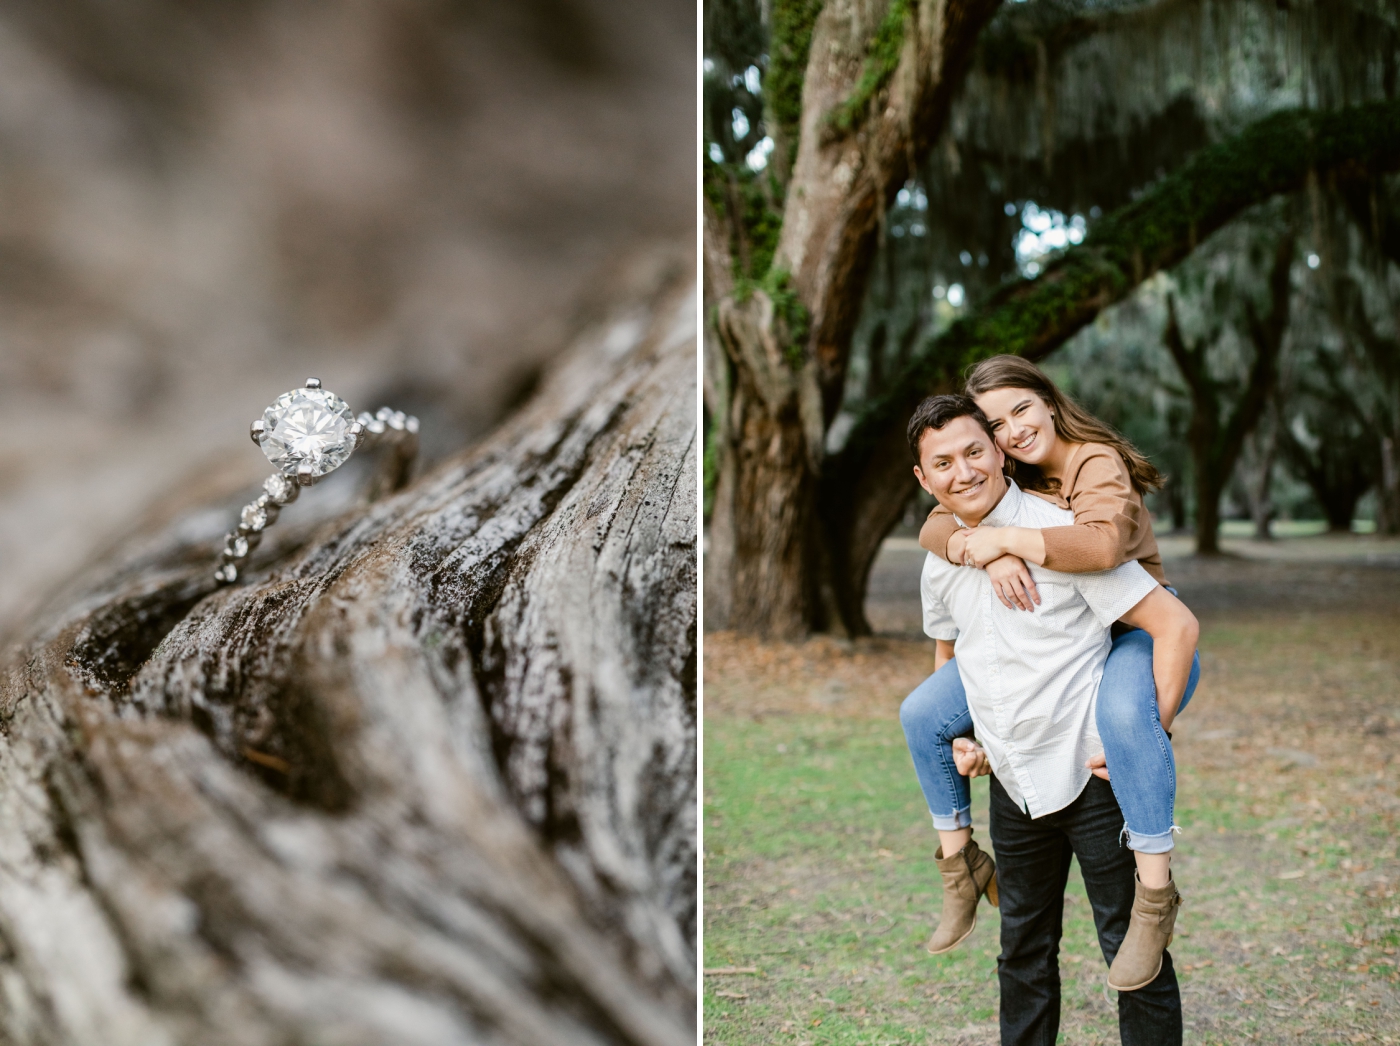 Golden Isles lifestyle and engagement photographer